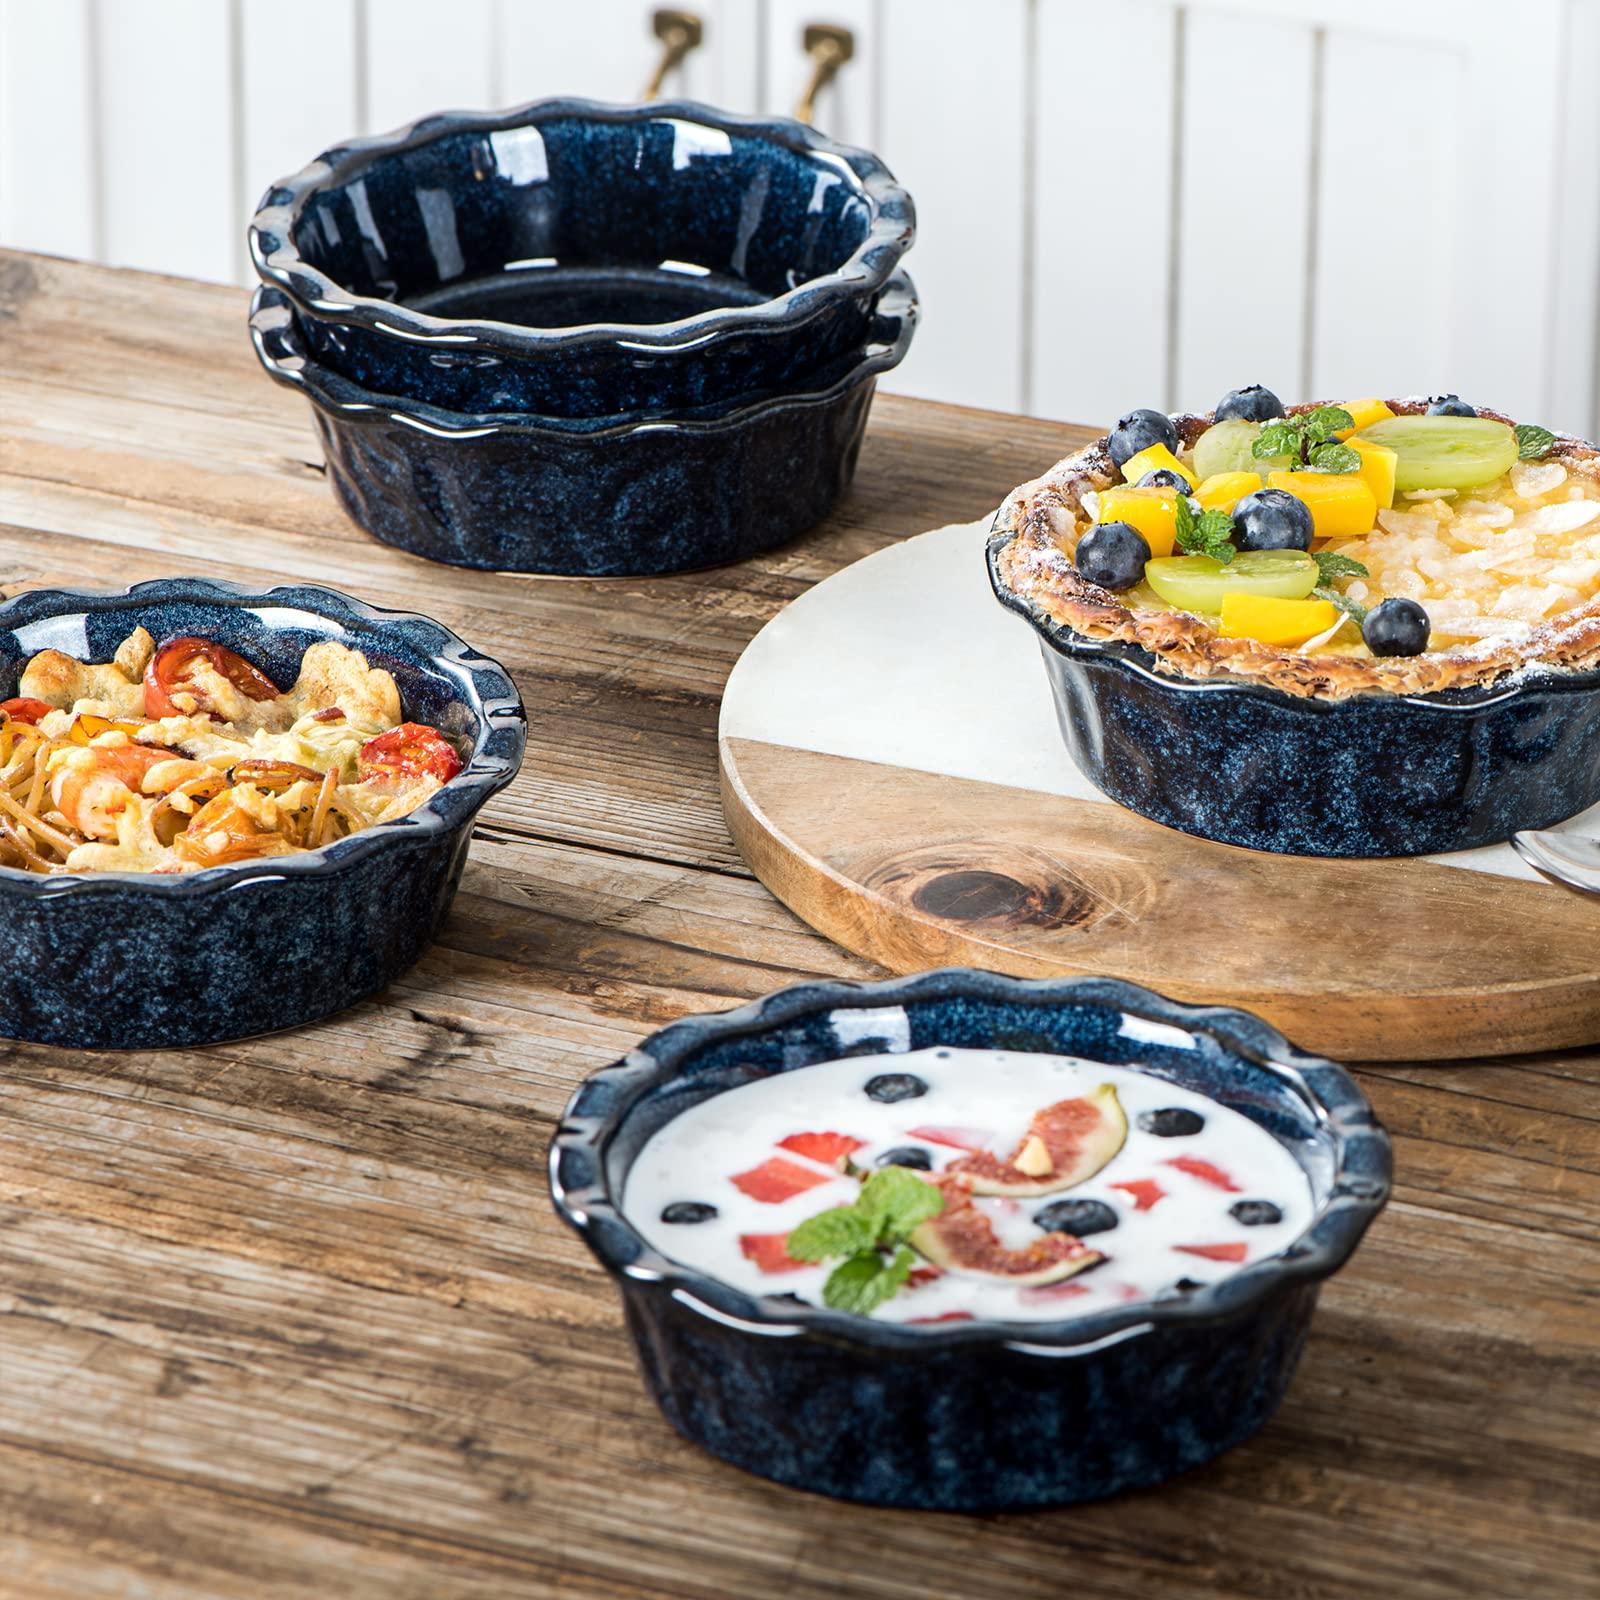 Vicrays Ceramic Pie Pan for Baking - 5.5 inch Small Pie Plates Deep Dish Round Pot Casserole Mini Serving Bowl, Microwave Oven Safe for Dessert Apple Pie Cake Tart Pizza, Set of 6, Blue - CookCave